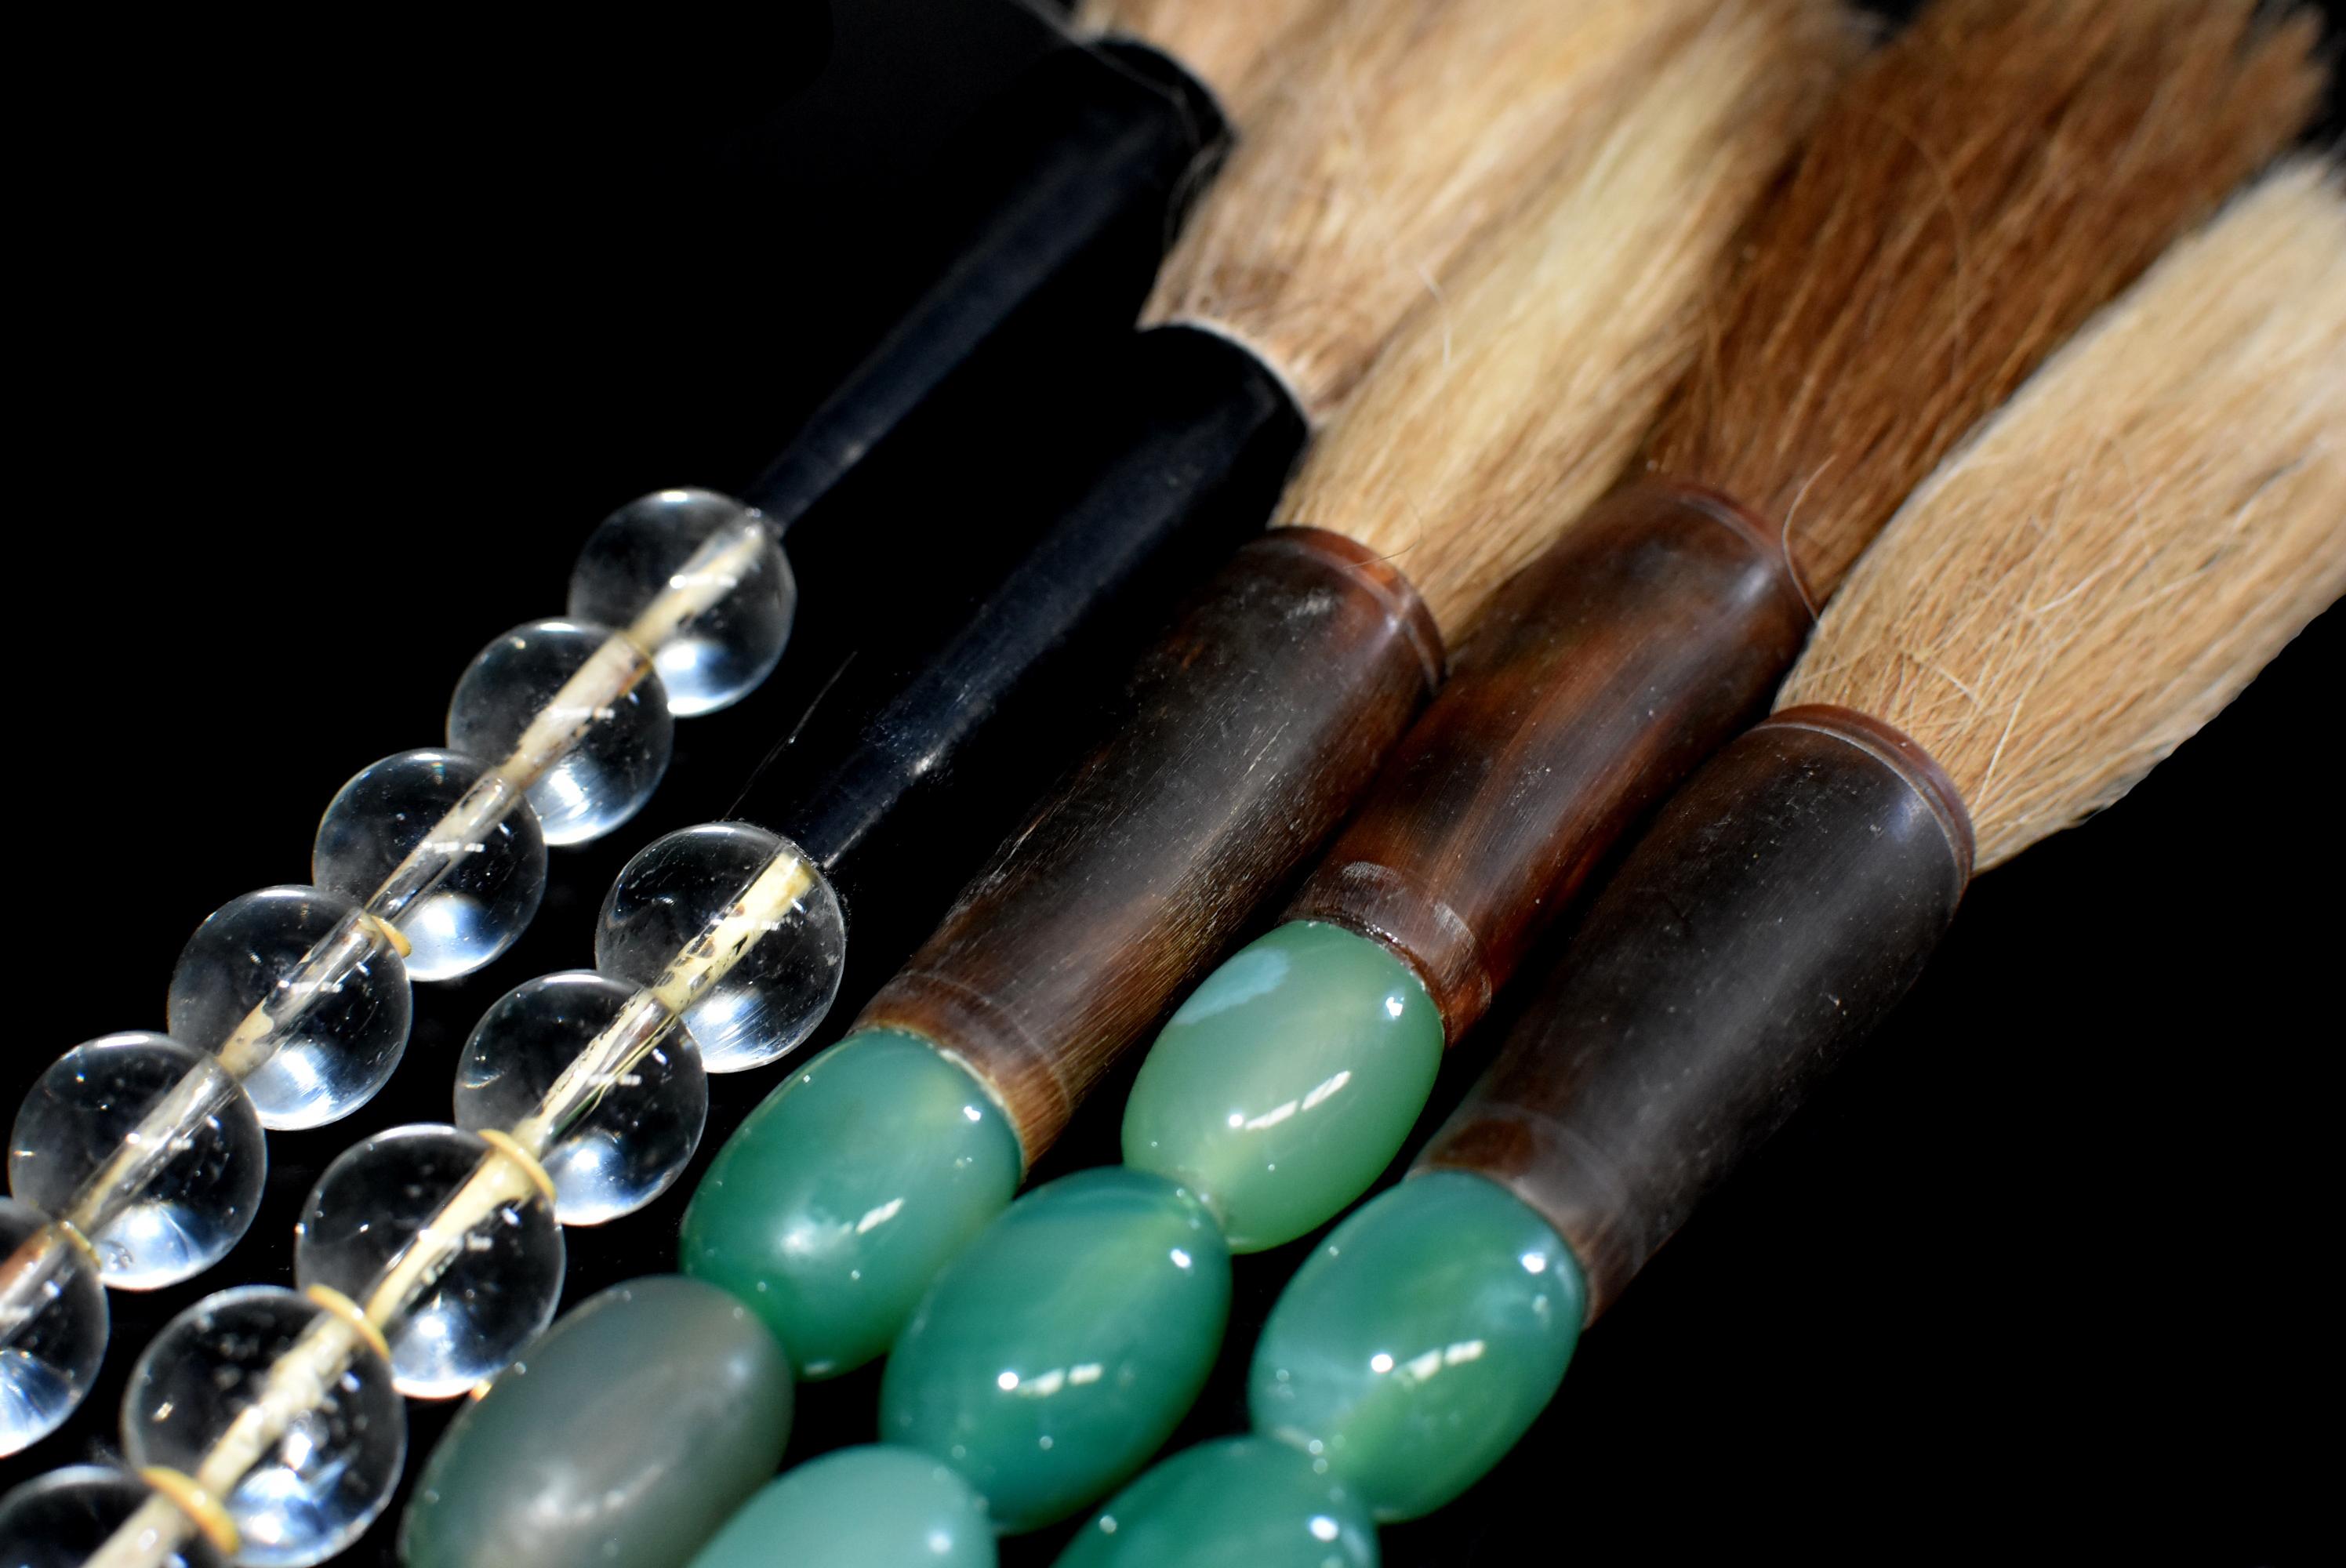 Calligraphy Brush Set of 5 with Glass Beads and Horn Ferrules 13